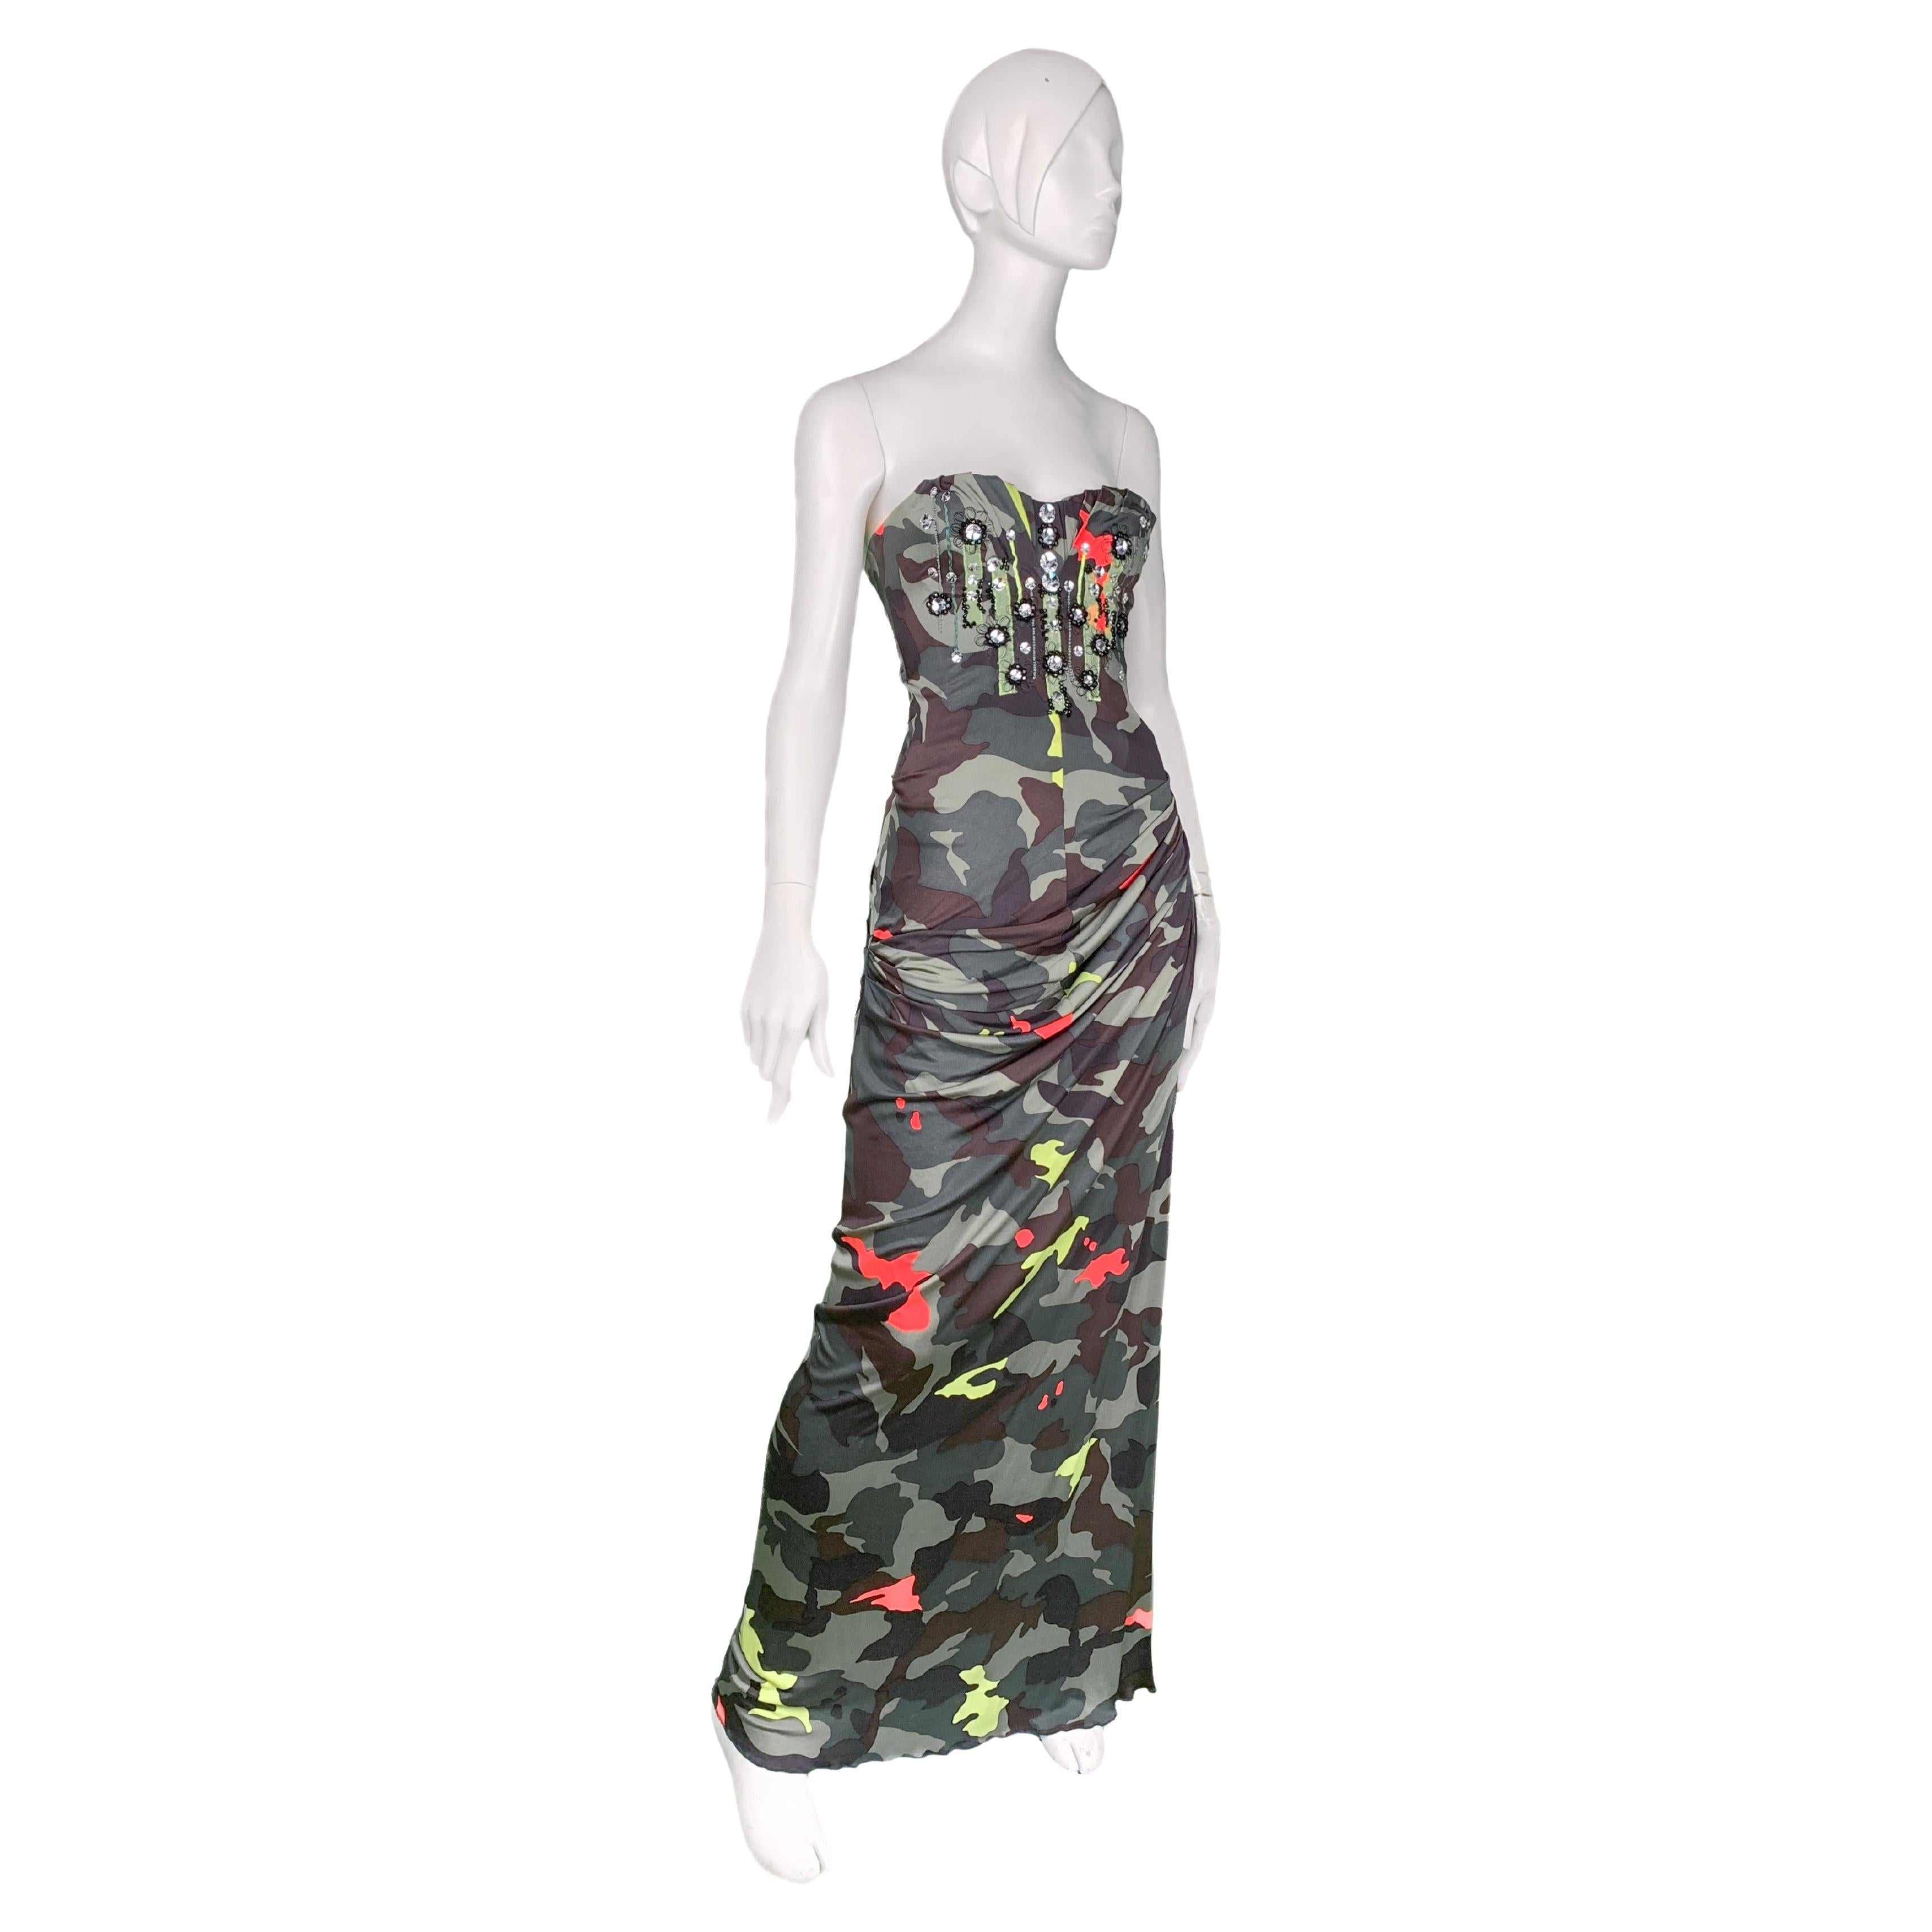 Seen at Blumarine Spring/Summer 2010 fashion show, this look 36 camo print strapless maxi dress was awarded a special (positive) mention in the Vogue review of the collection as 